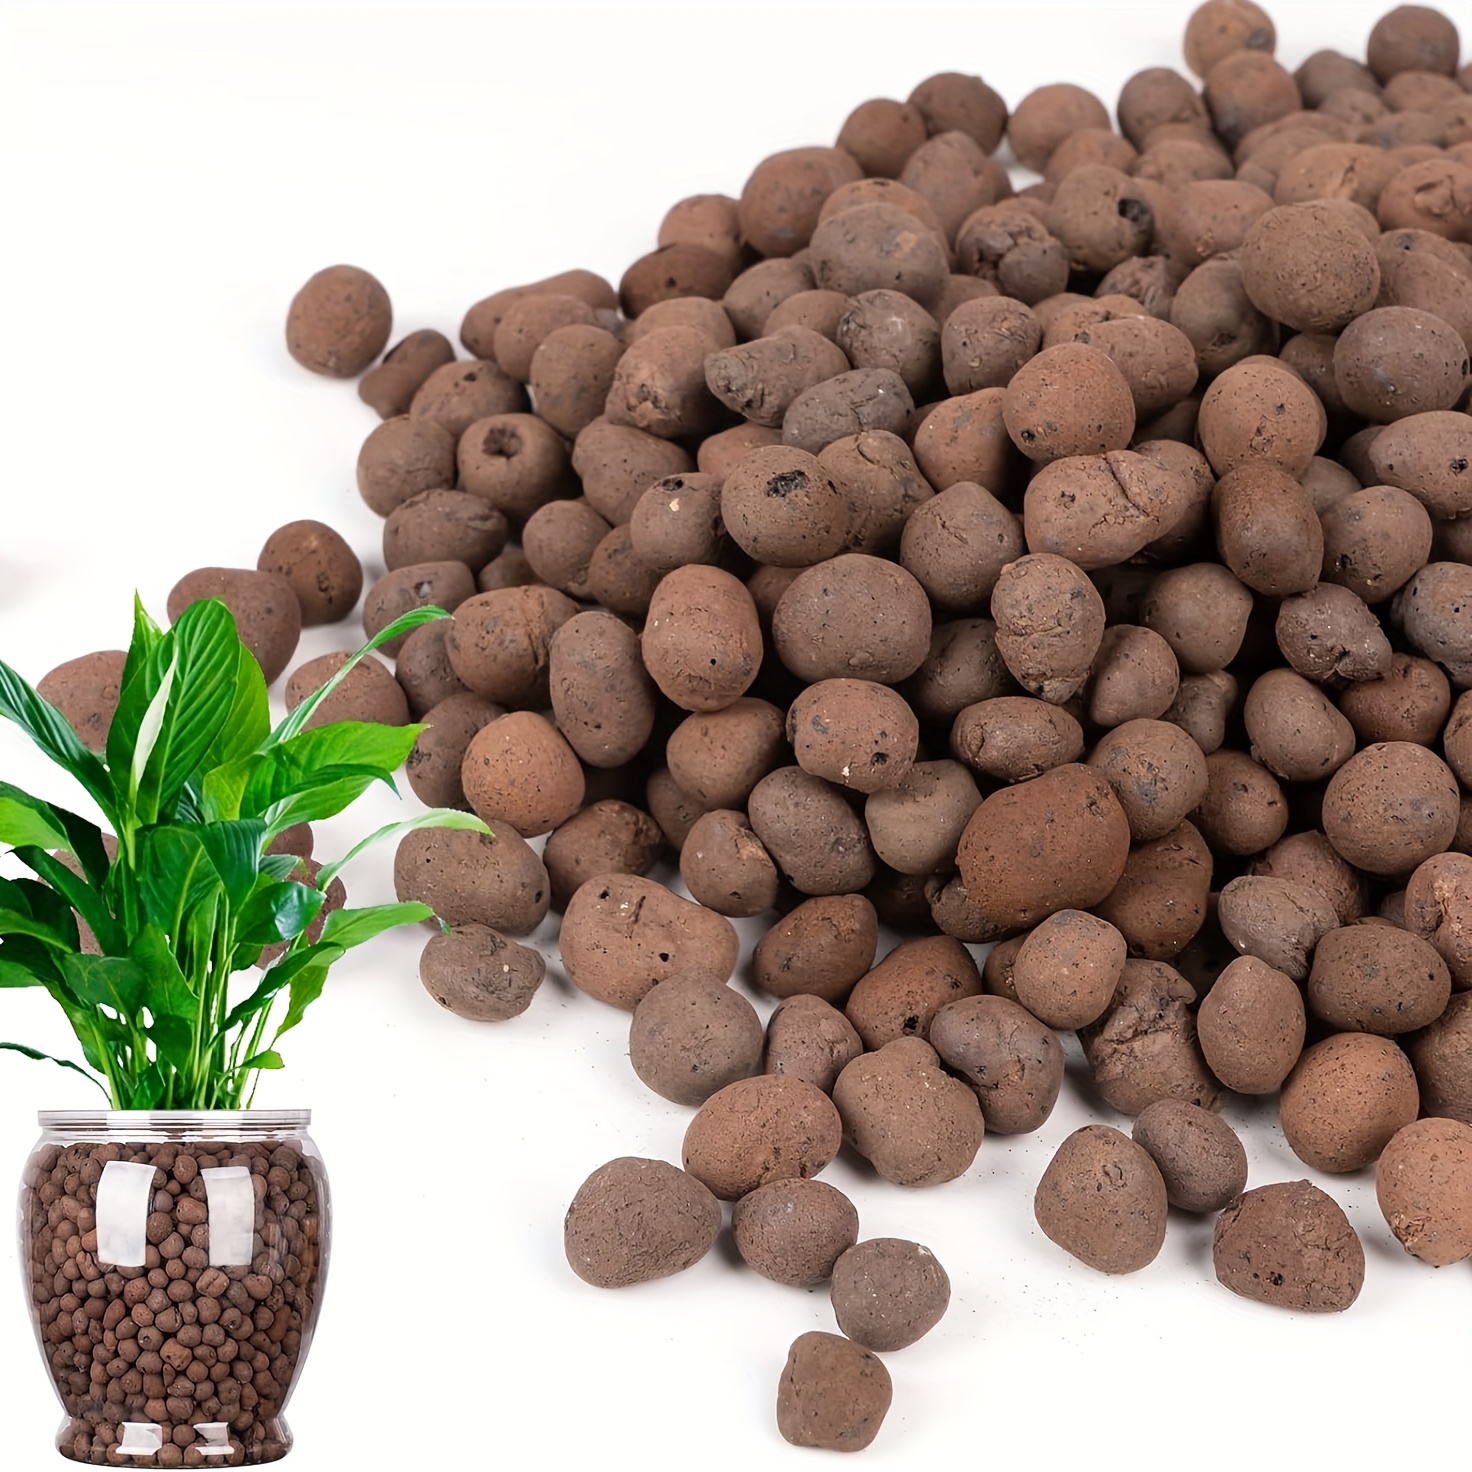 

1 Pack Expansive Clay Pebbles, Light Clay Balls For Plants, Natural Clay Pebbles For Hydroponics And Aquatic Plant Growth, Orchid Potted Mixture, Horticultural Soil Hydroponics